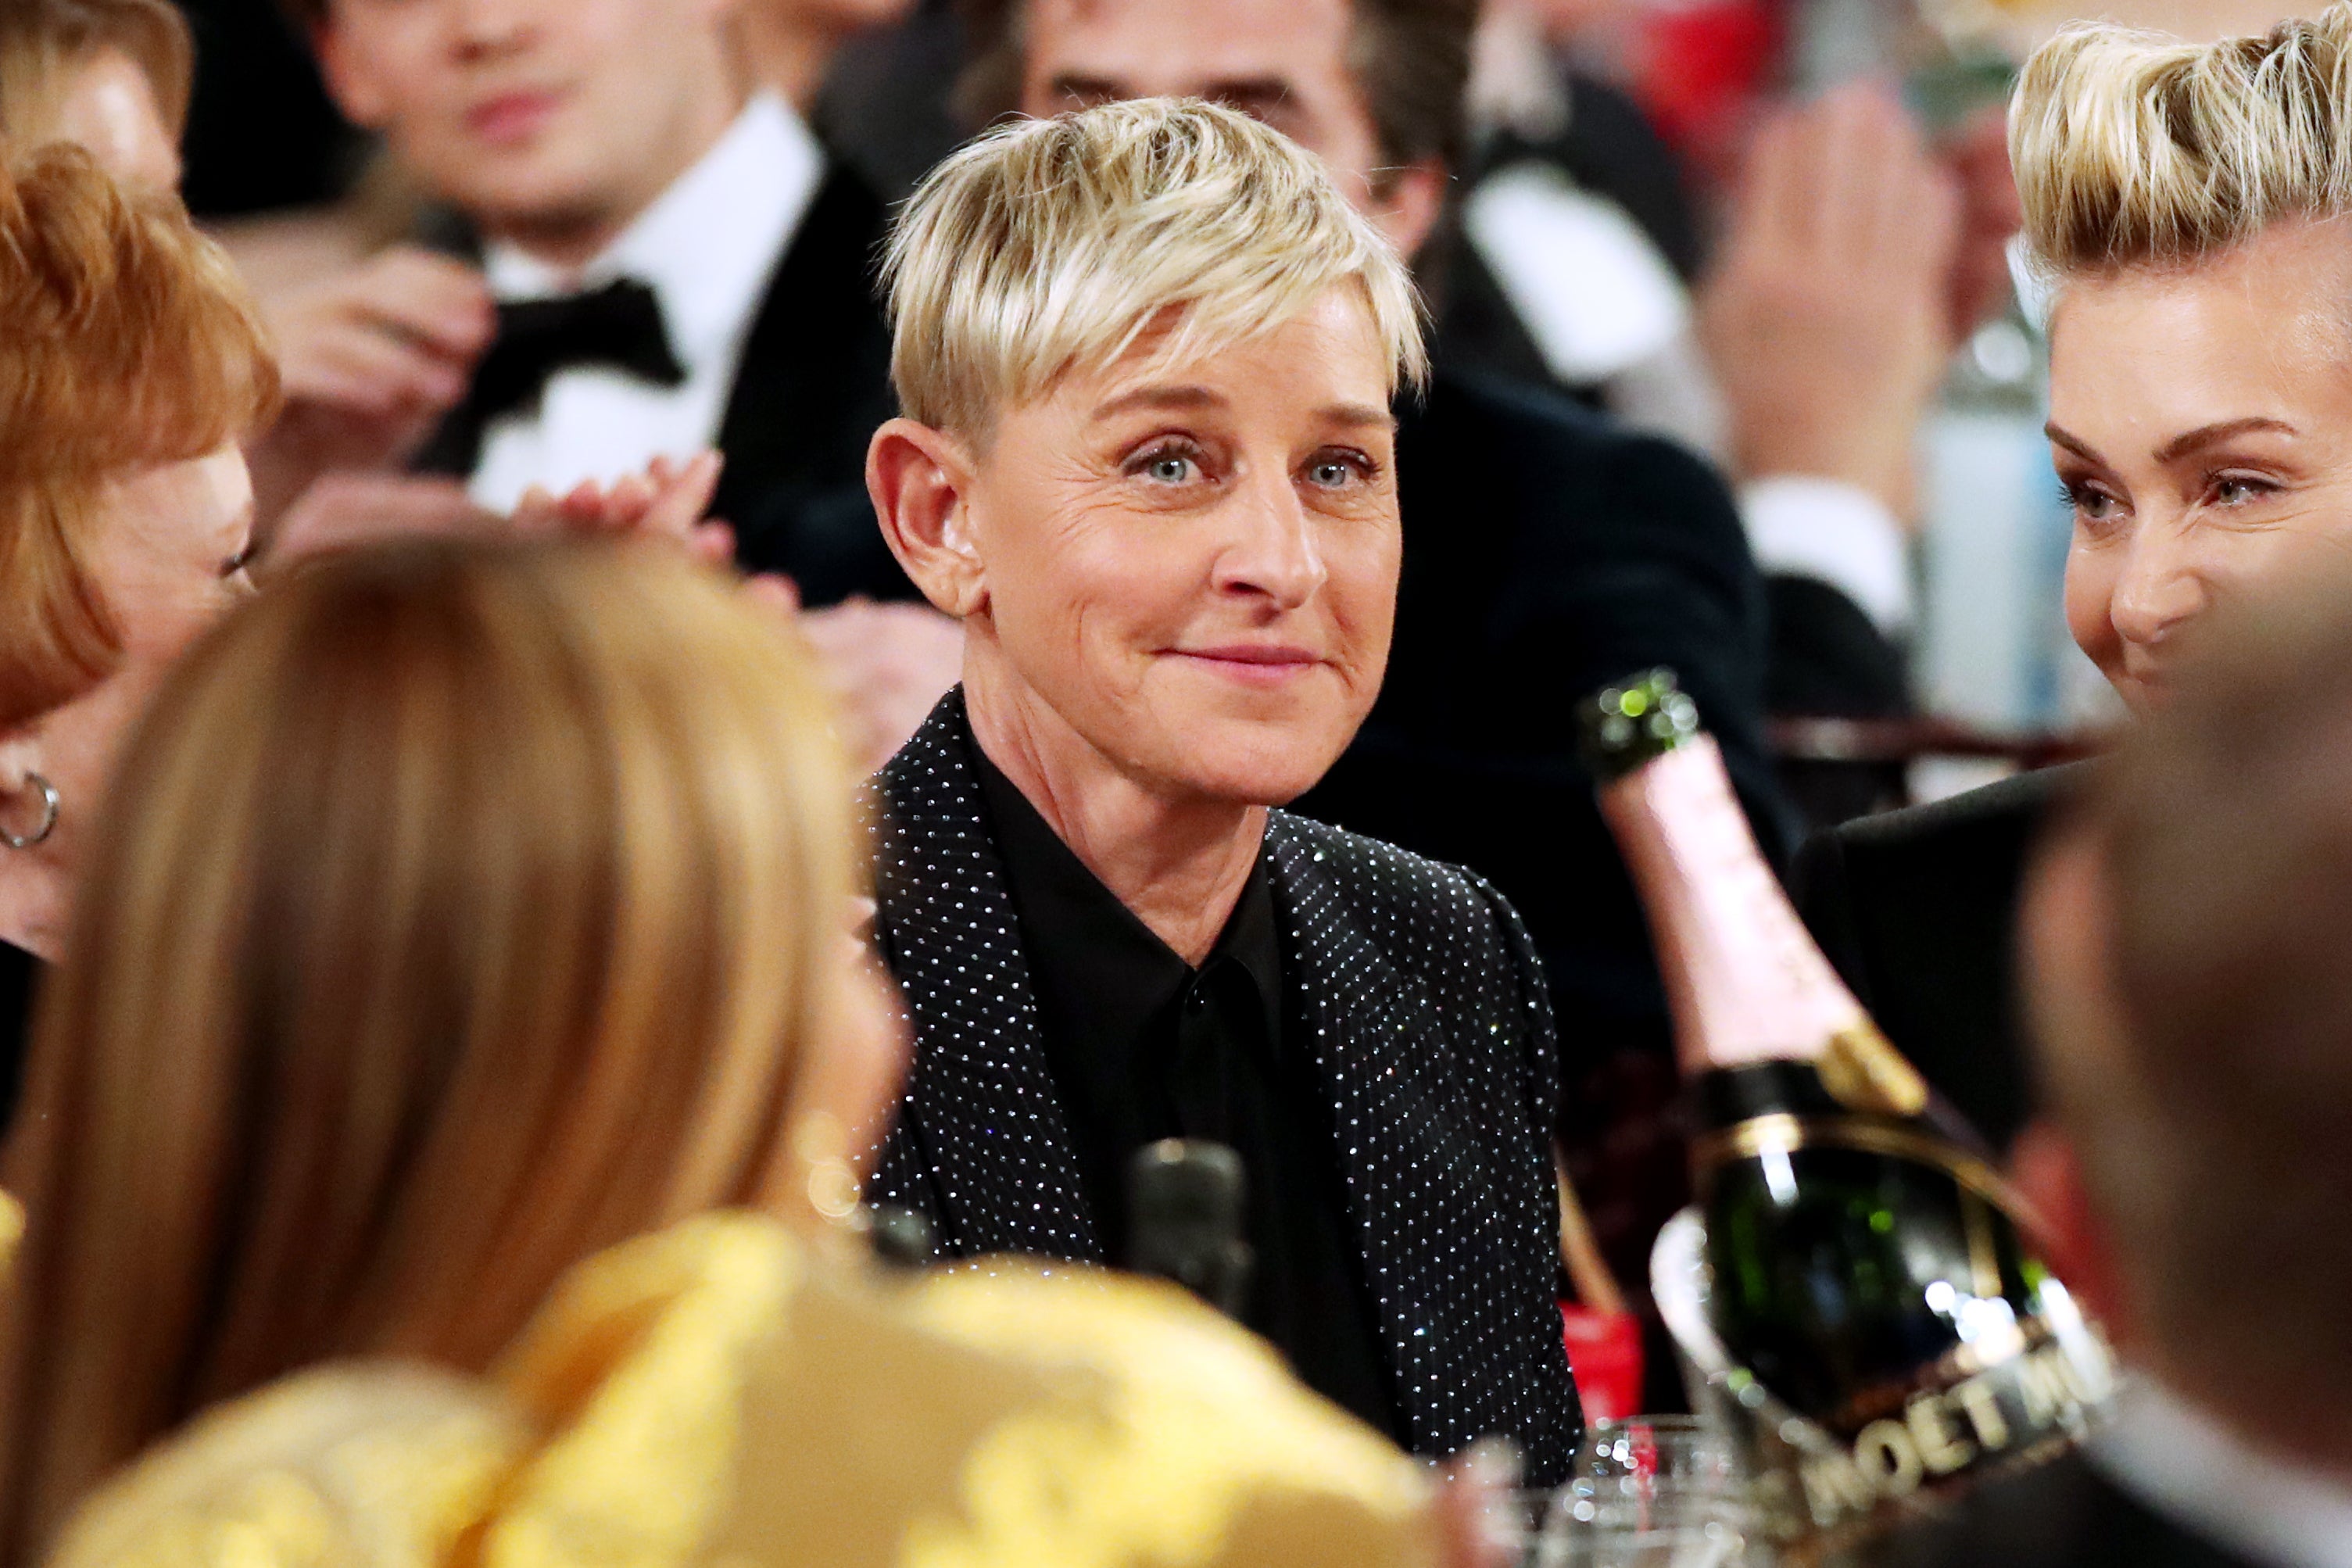 Ellen DeGeneres Said She “Hated The Way” That “The Ellen Show” Ended Following Claims Of A Toxic Work Environment